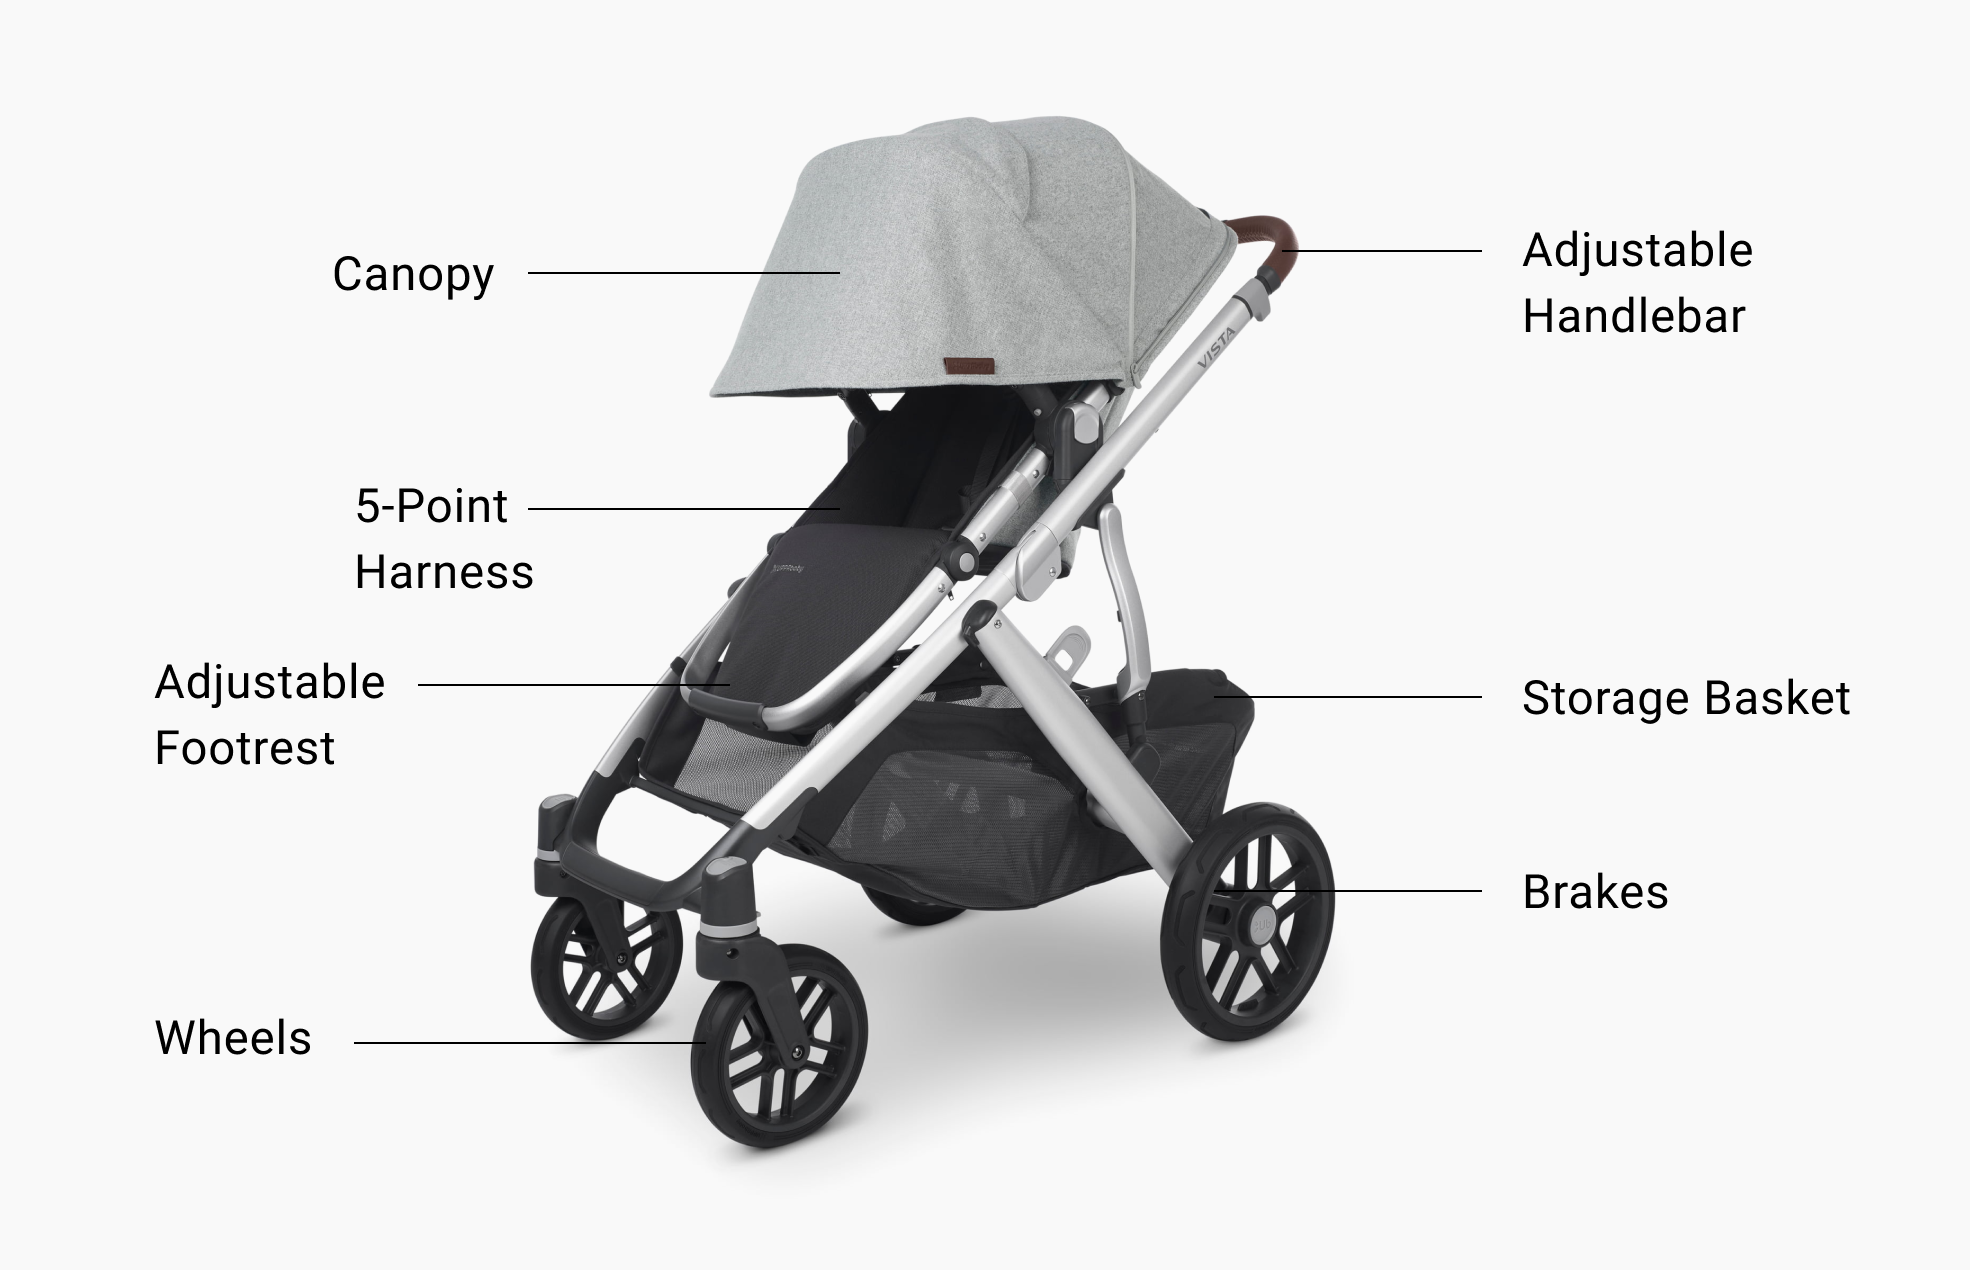 Photo of the parts of a stroller